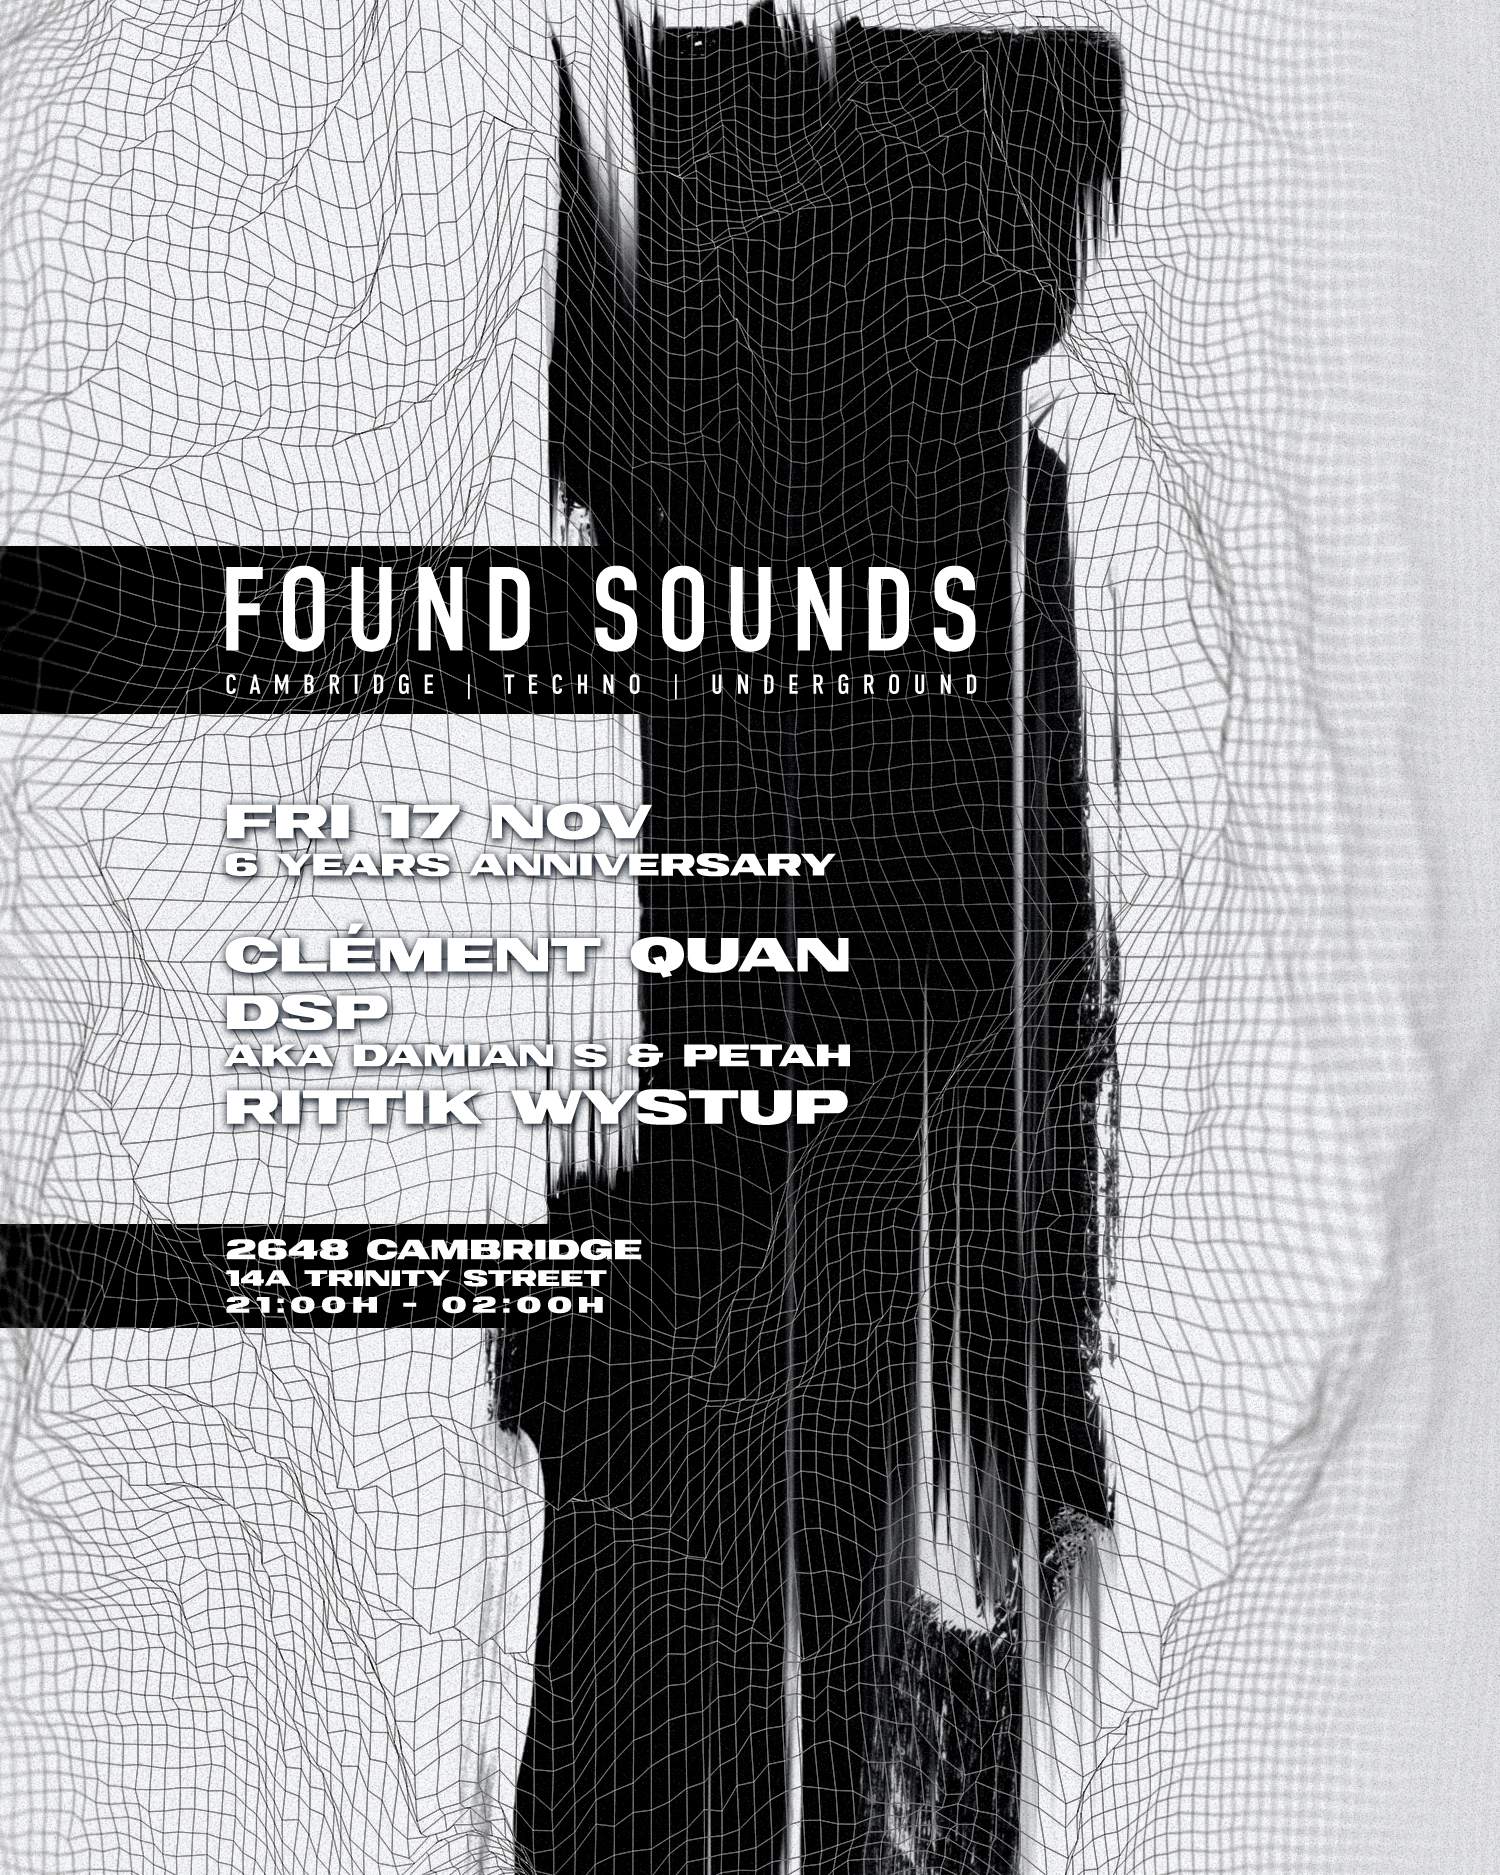 Found Sounds 6 Years Anniversary Special at 2648 Cambridge, South